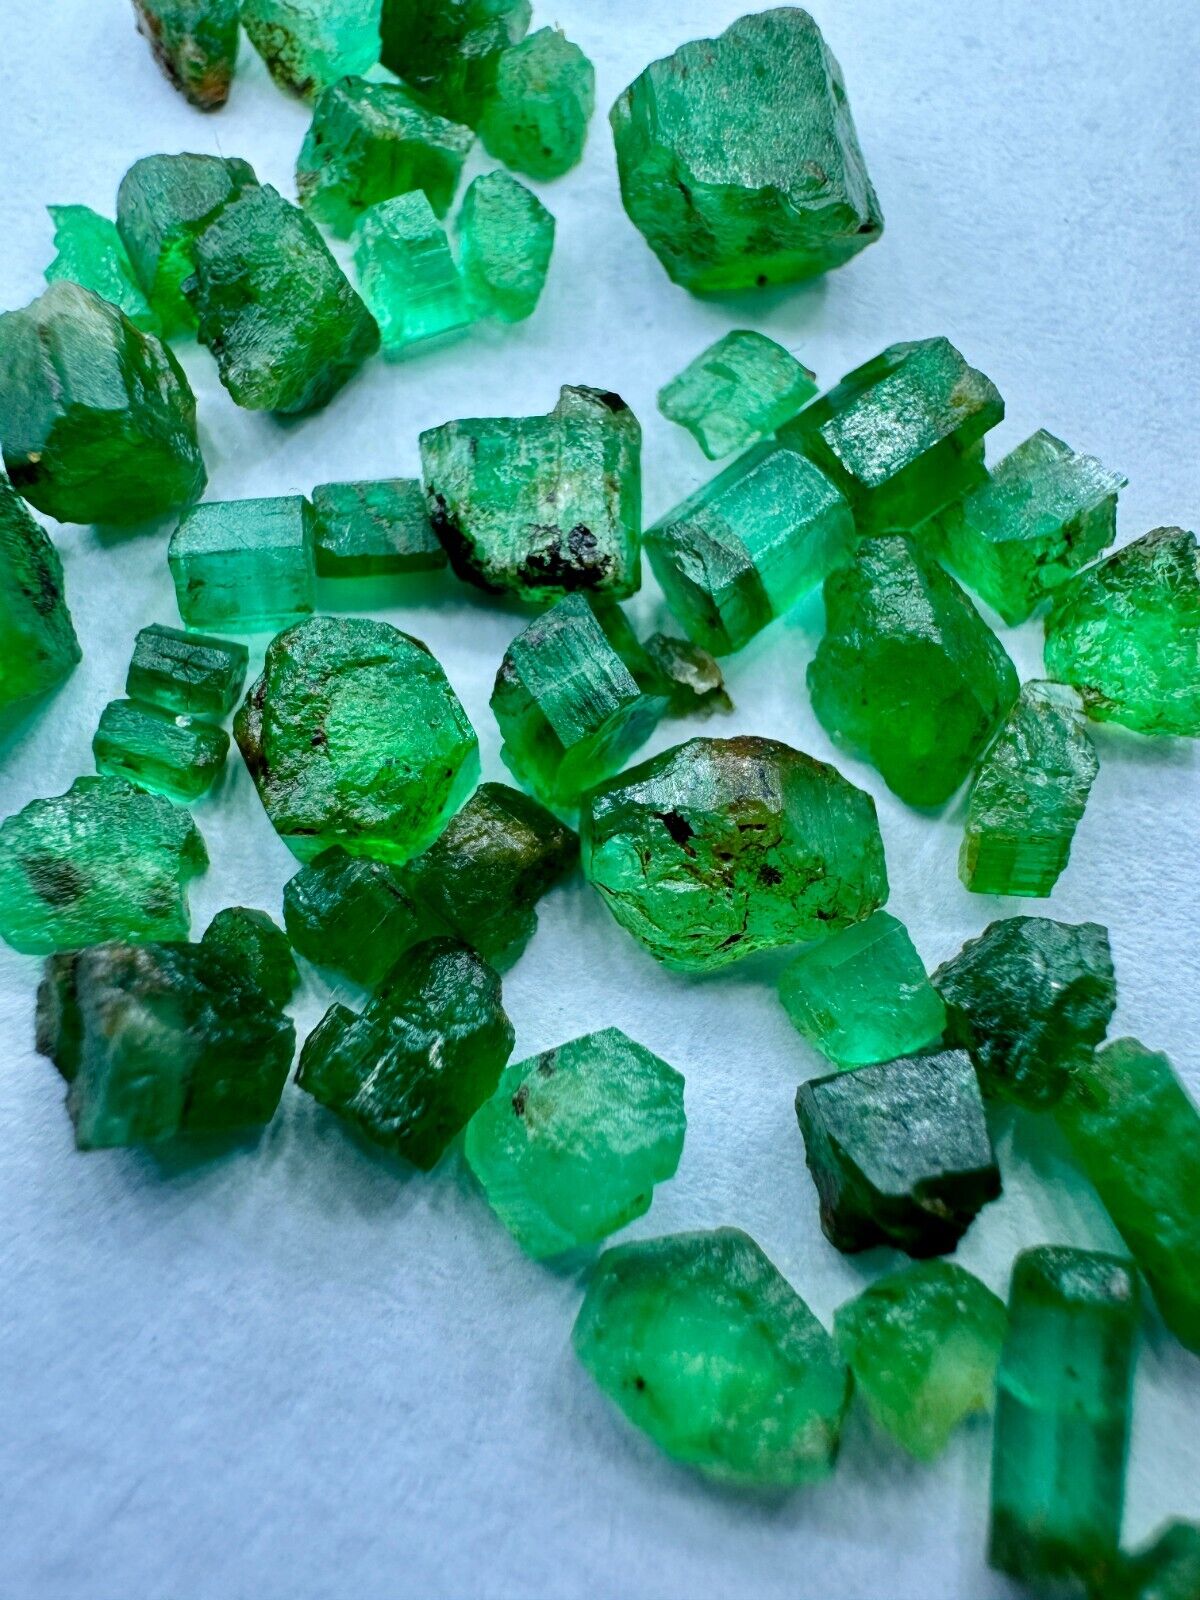 20 CT Amazing Top Quality Top Green  Emeralds  Lot From Panjshir AFG.